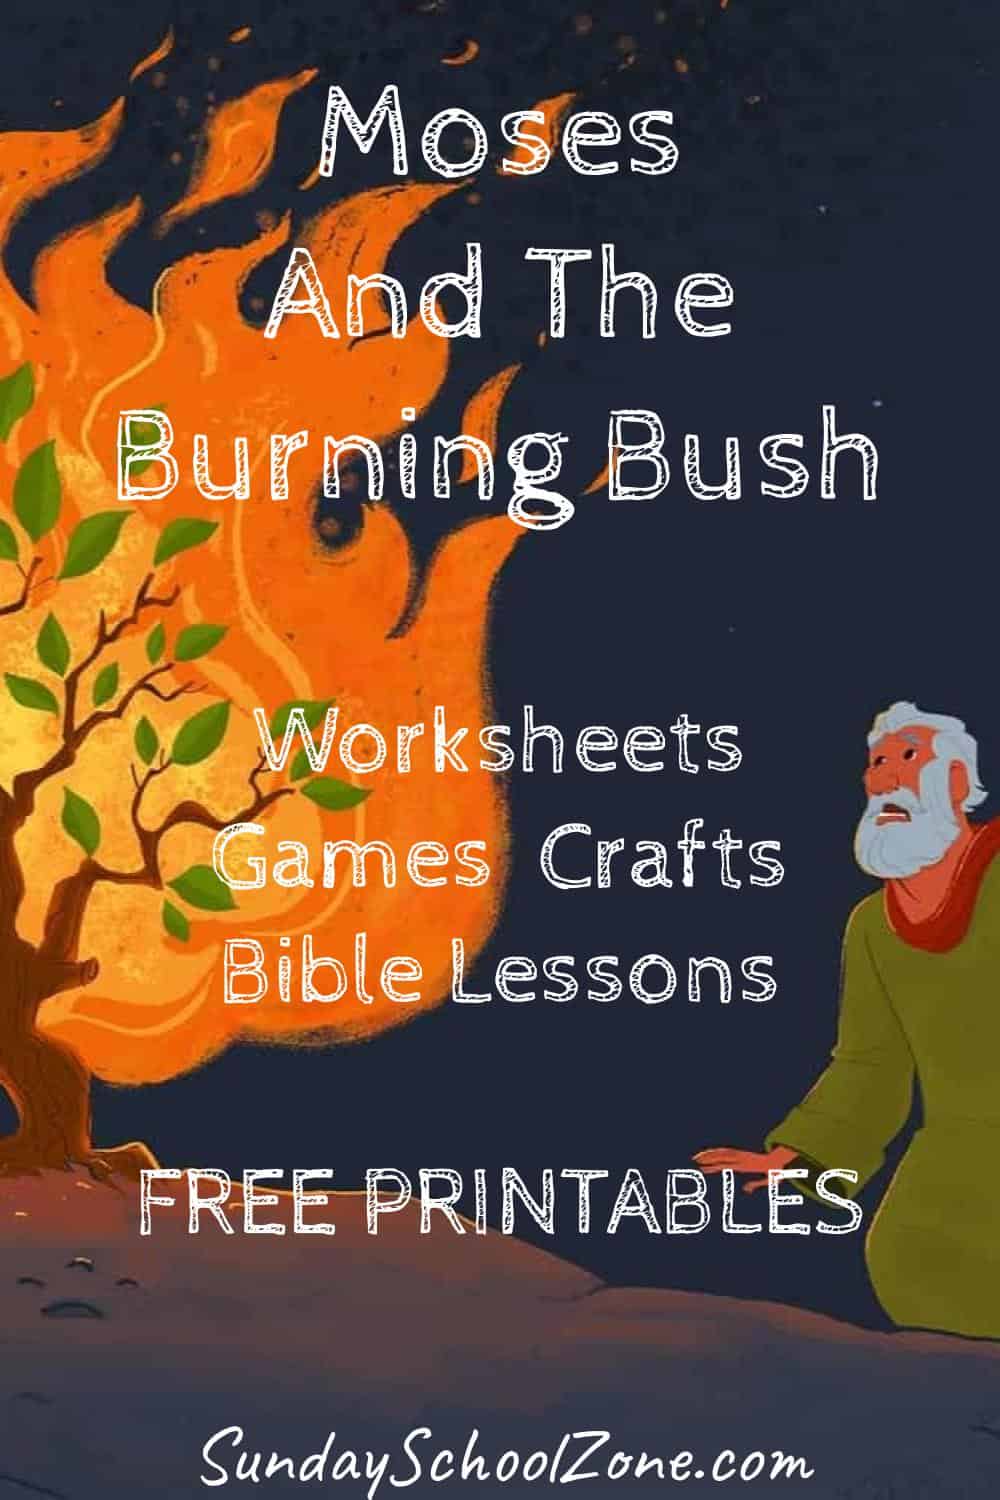 Free moses and the burning bush bible activities on sunday school zone